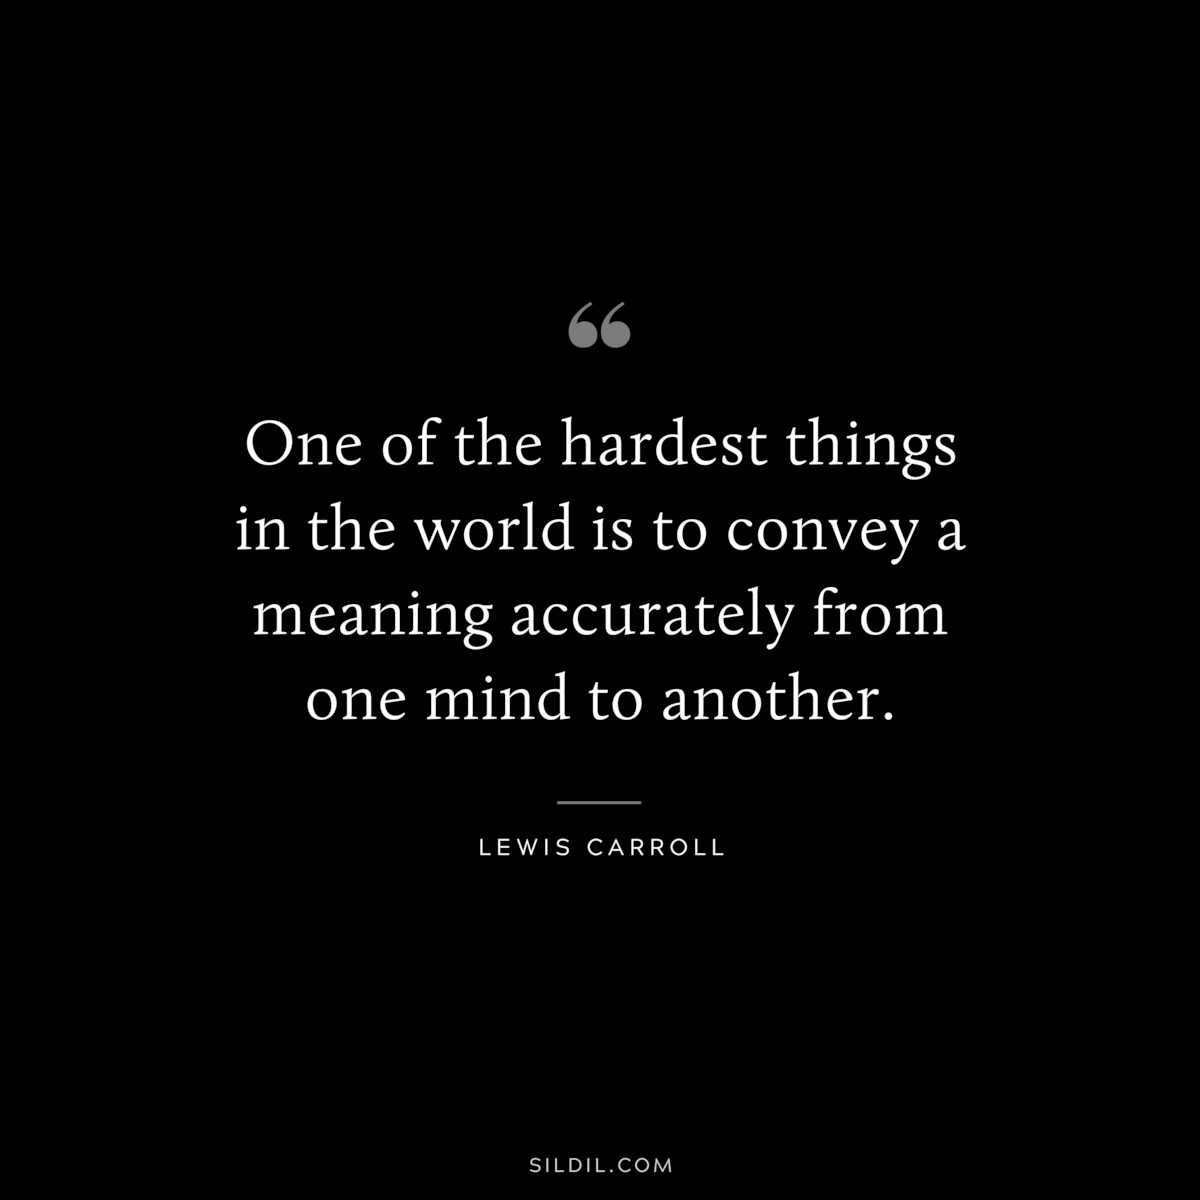 One of the hardest things in the world is to convey a meaning accurately from one mind to another.